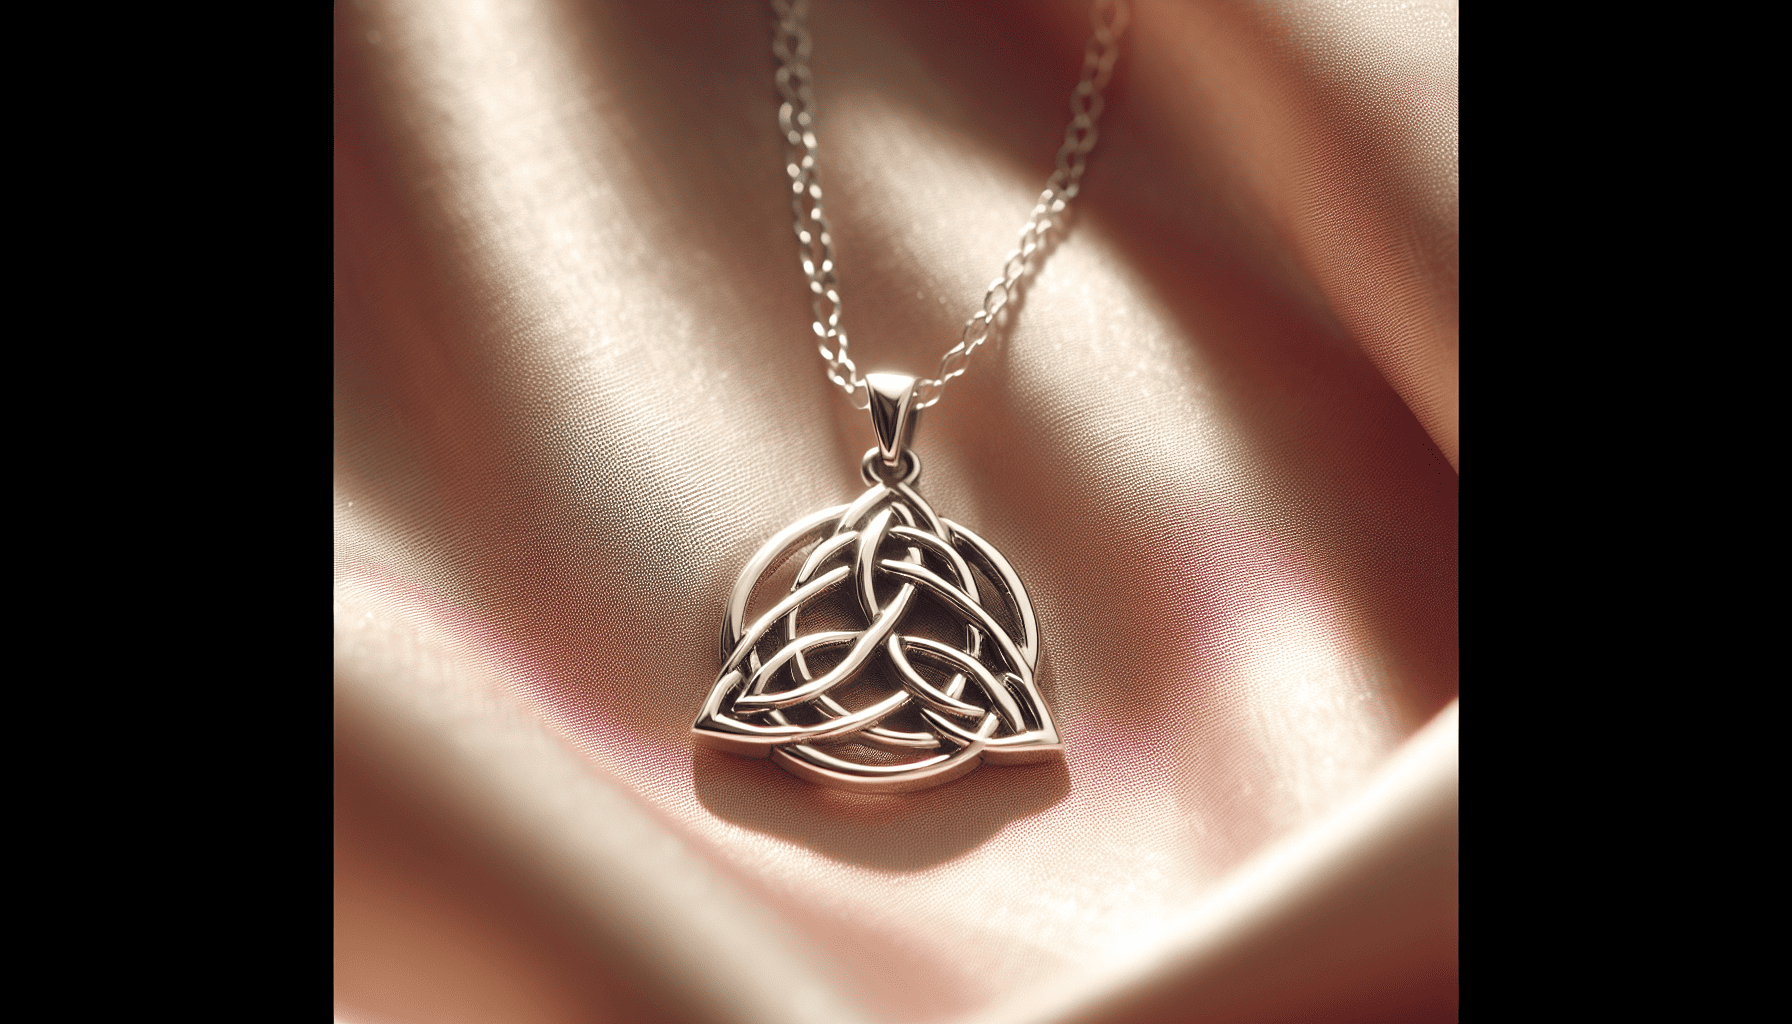 A beautiful illustration of a Triquetra jewelry design, symbolizing unity, protection, and eternity